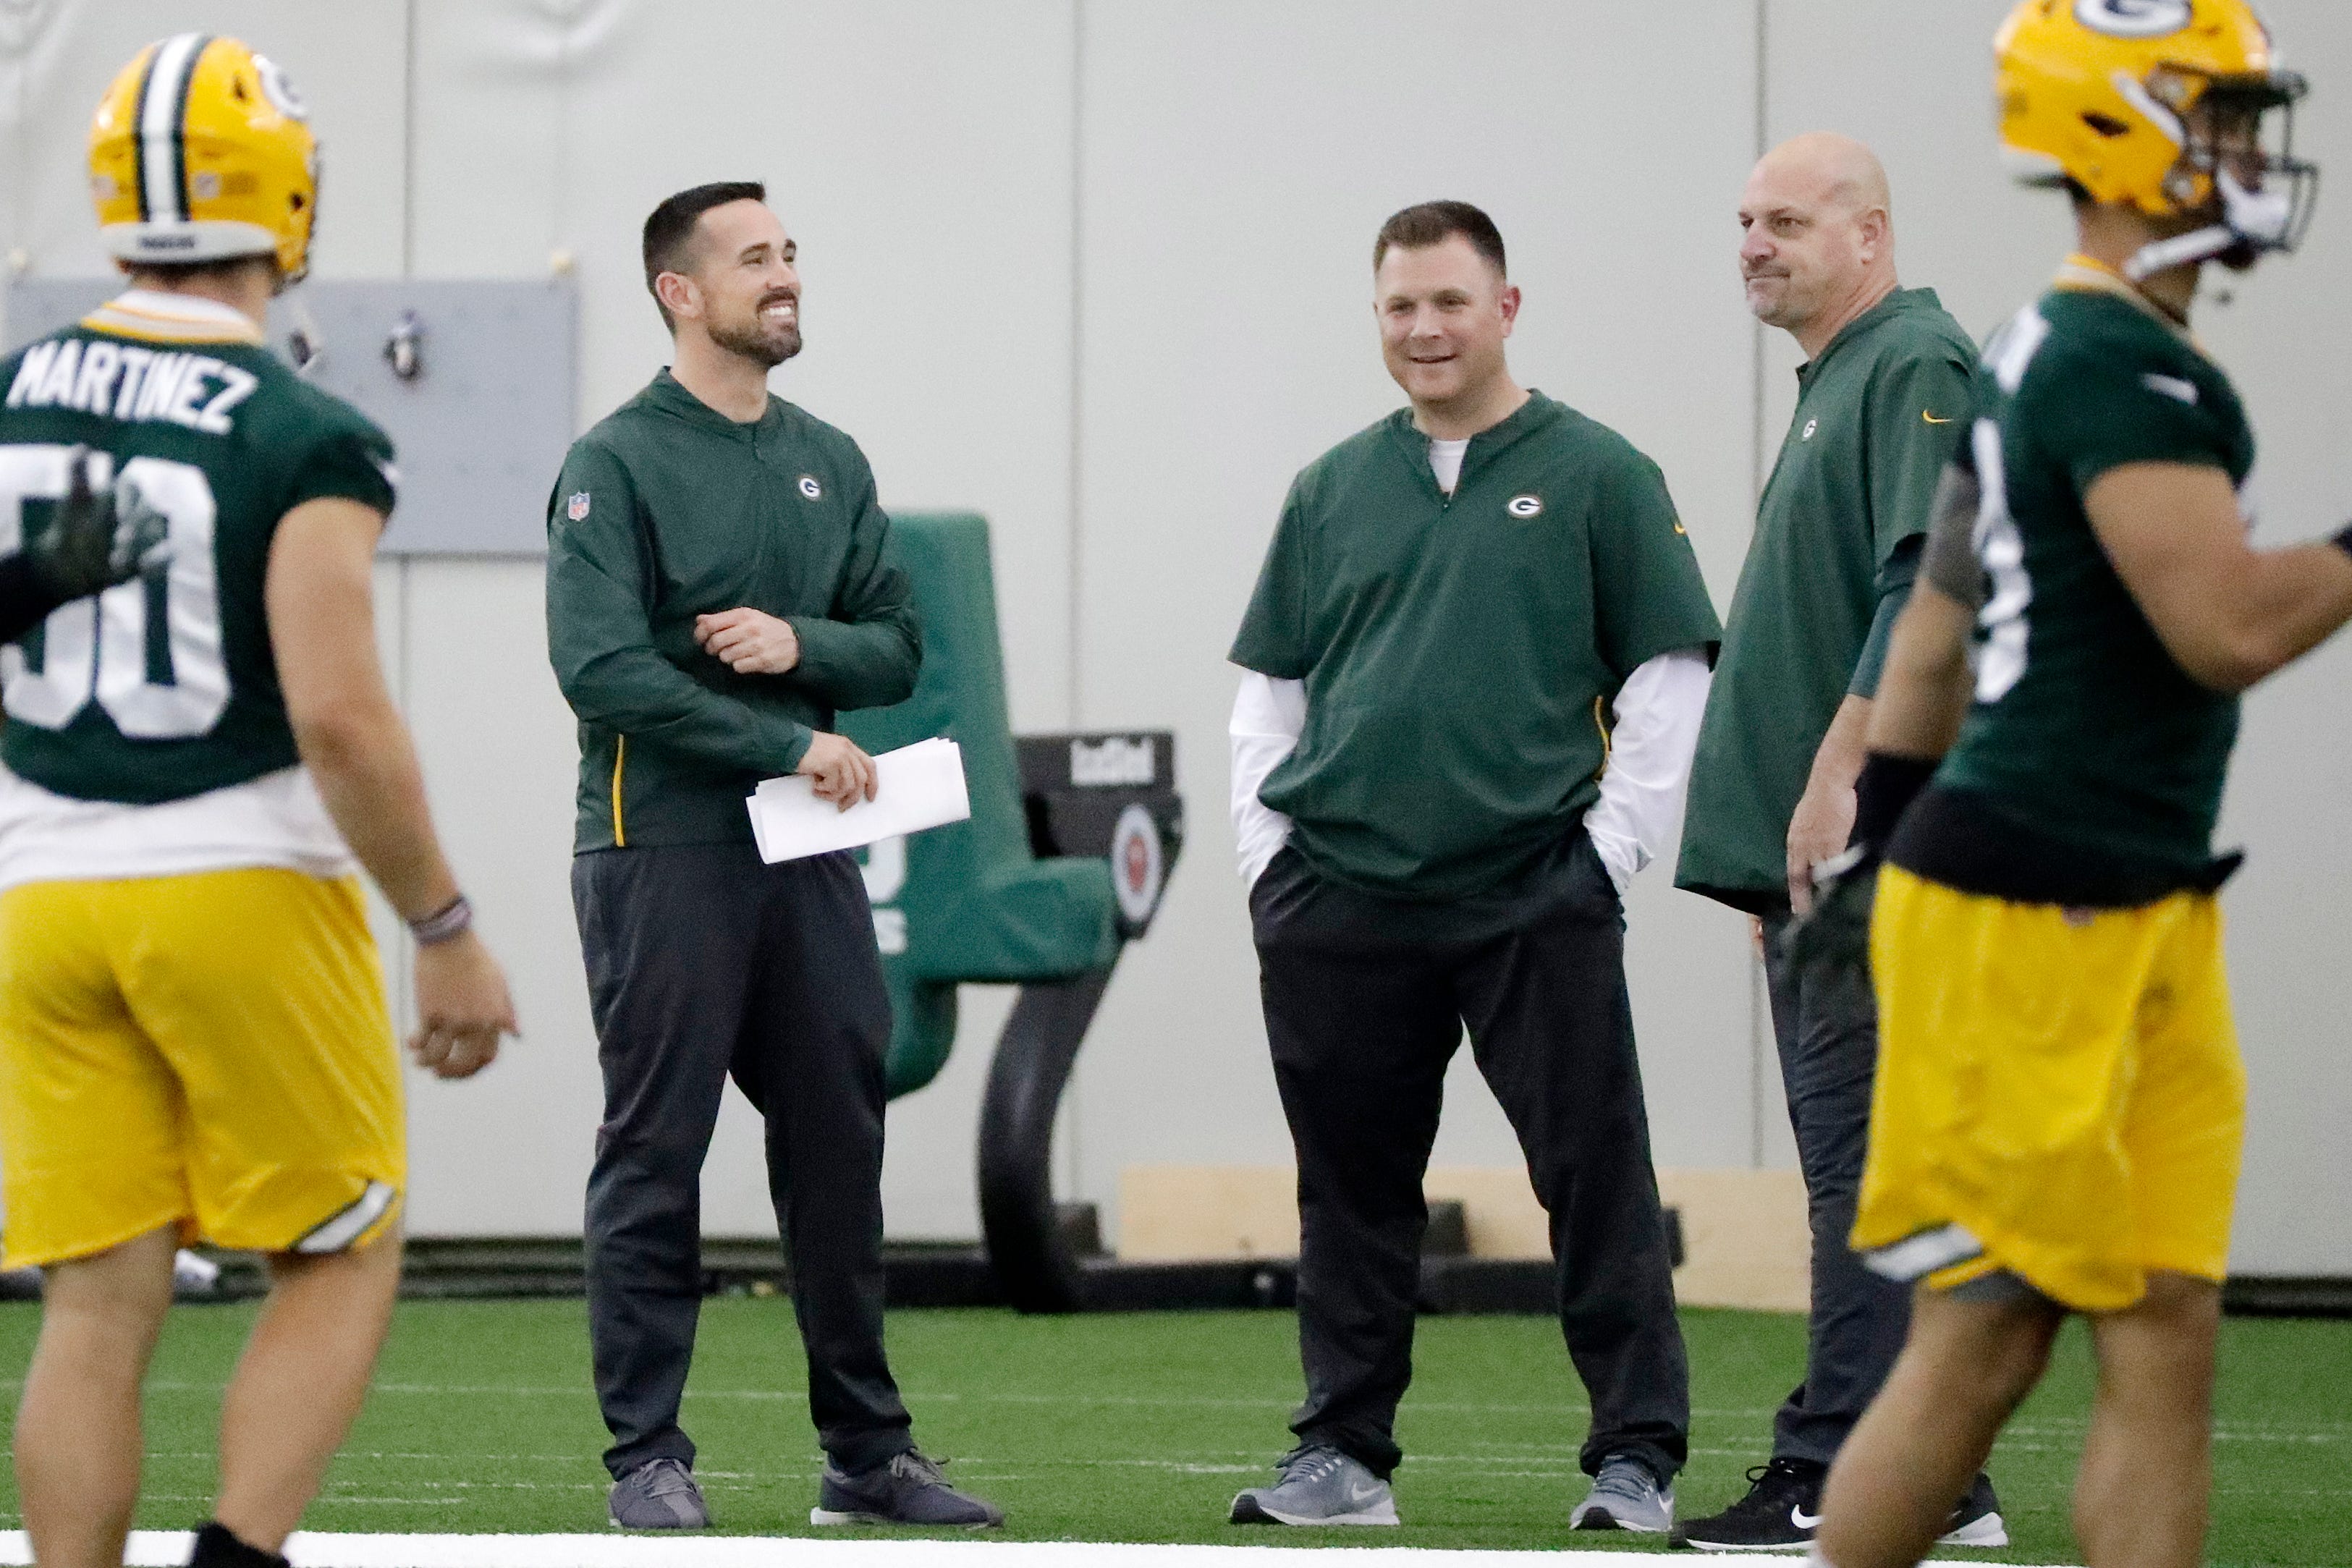 Green Bay Packers head coach Matt LaFleur, general manager Brian Gutekunst, and defensive coordinator Mike Pettine talk during a team practice at the Don Hutson Center on Wednesday, April 24, 2019 in Ashwaubenon, Wis.